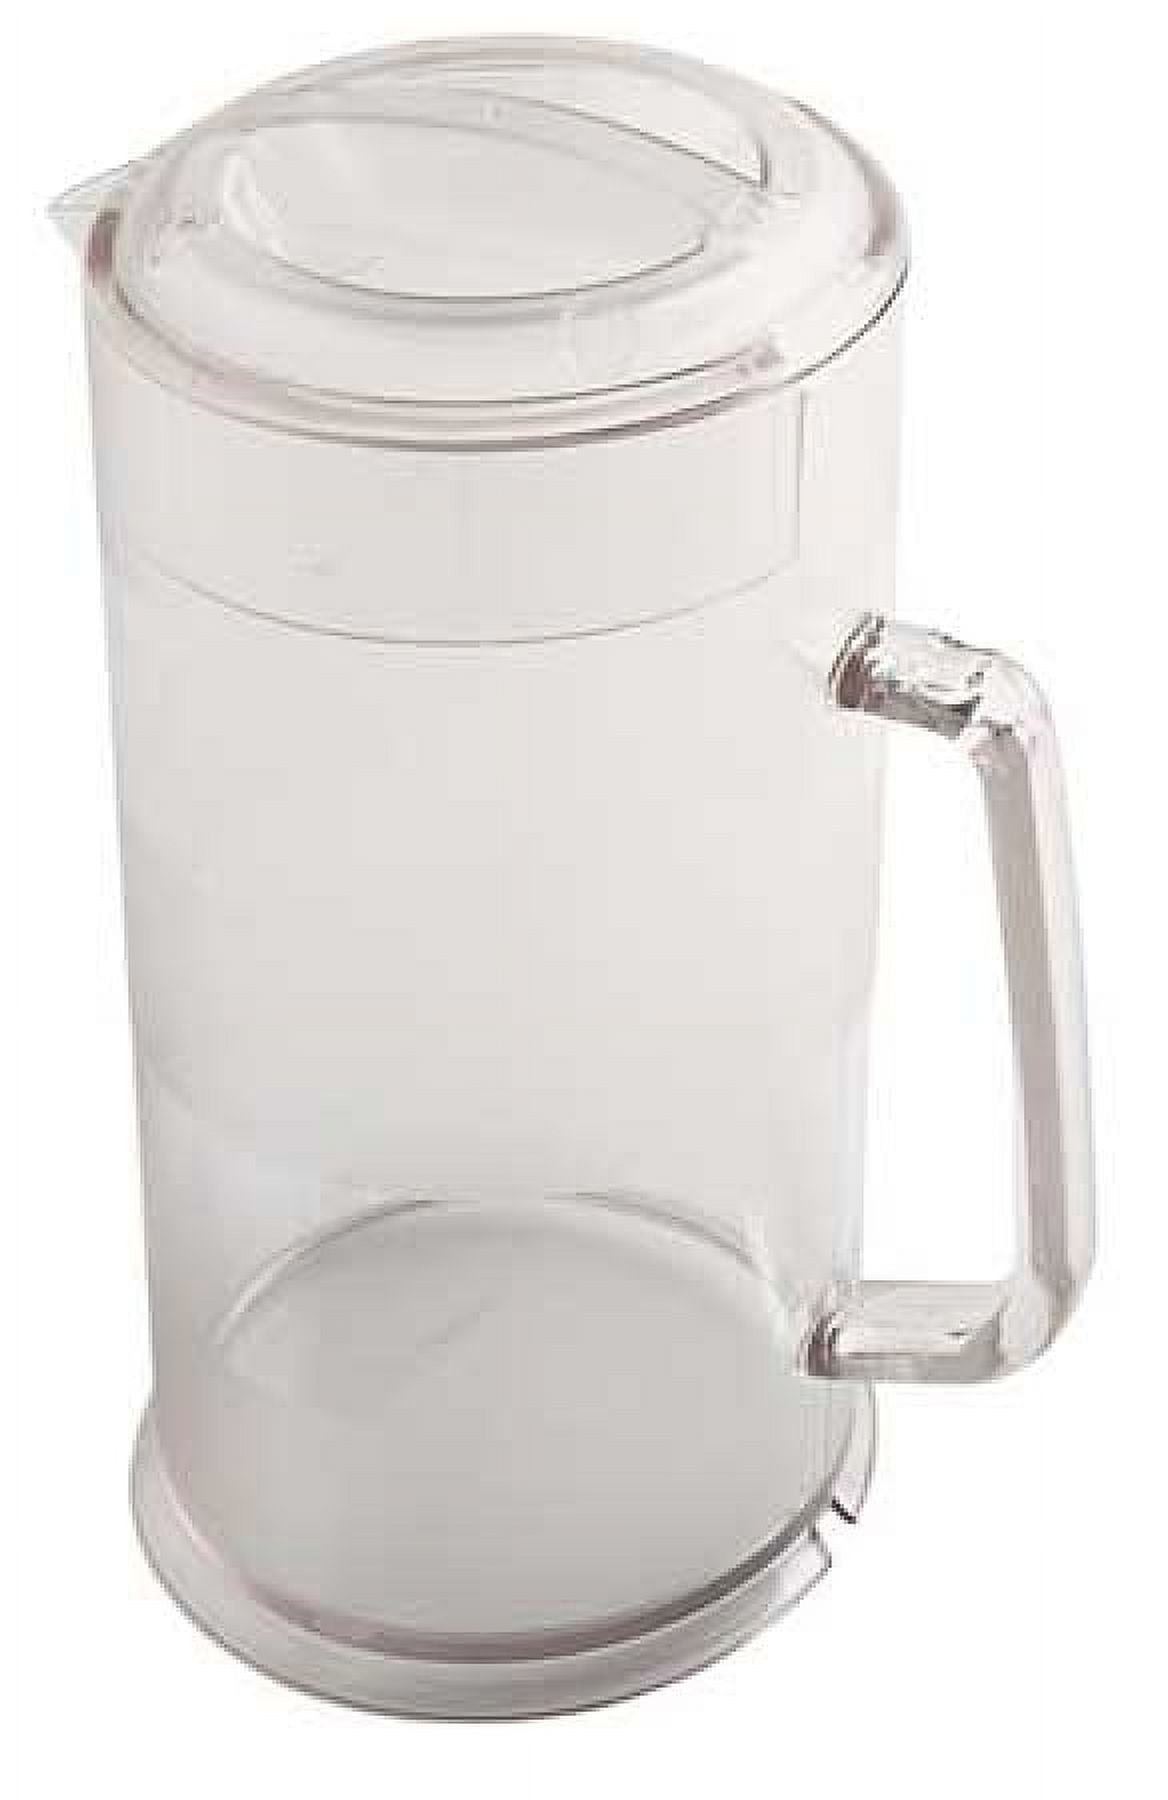 Rubbermaid Gallon Pitchers, Glass Pitcher, 64oz Containers